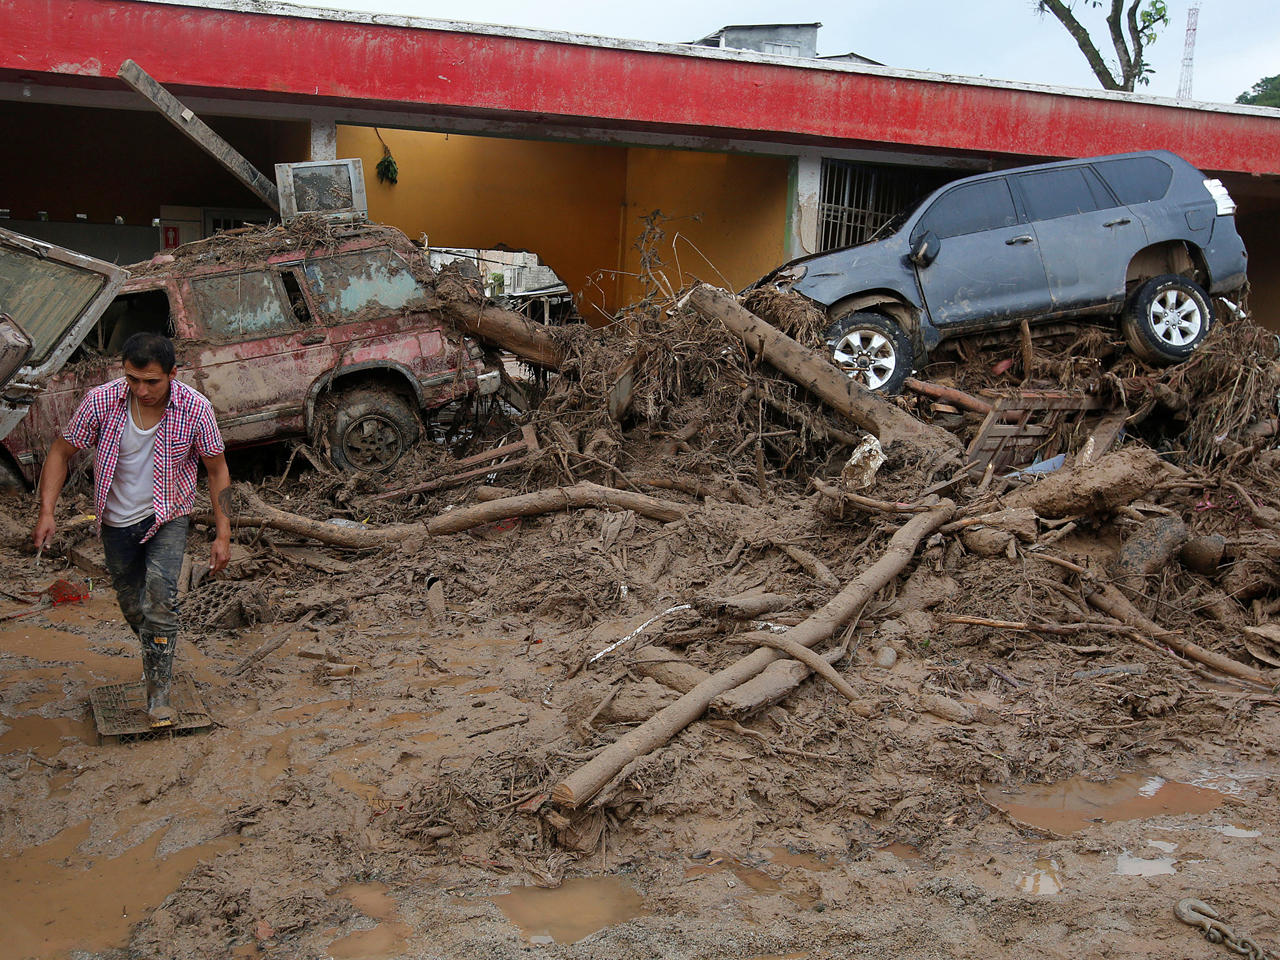 Disaster in Mocoa - Torrent of floodwaters sweeps through Colombian ...